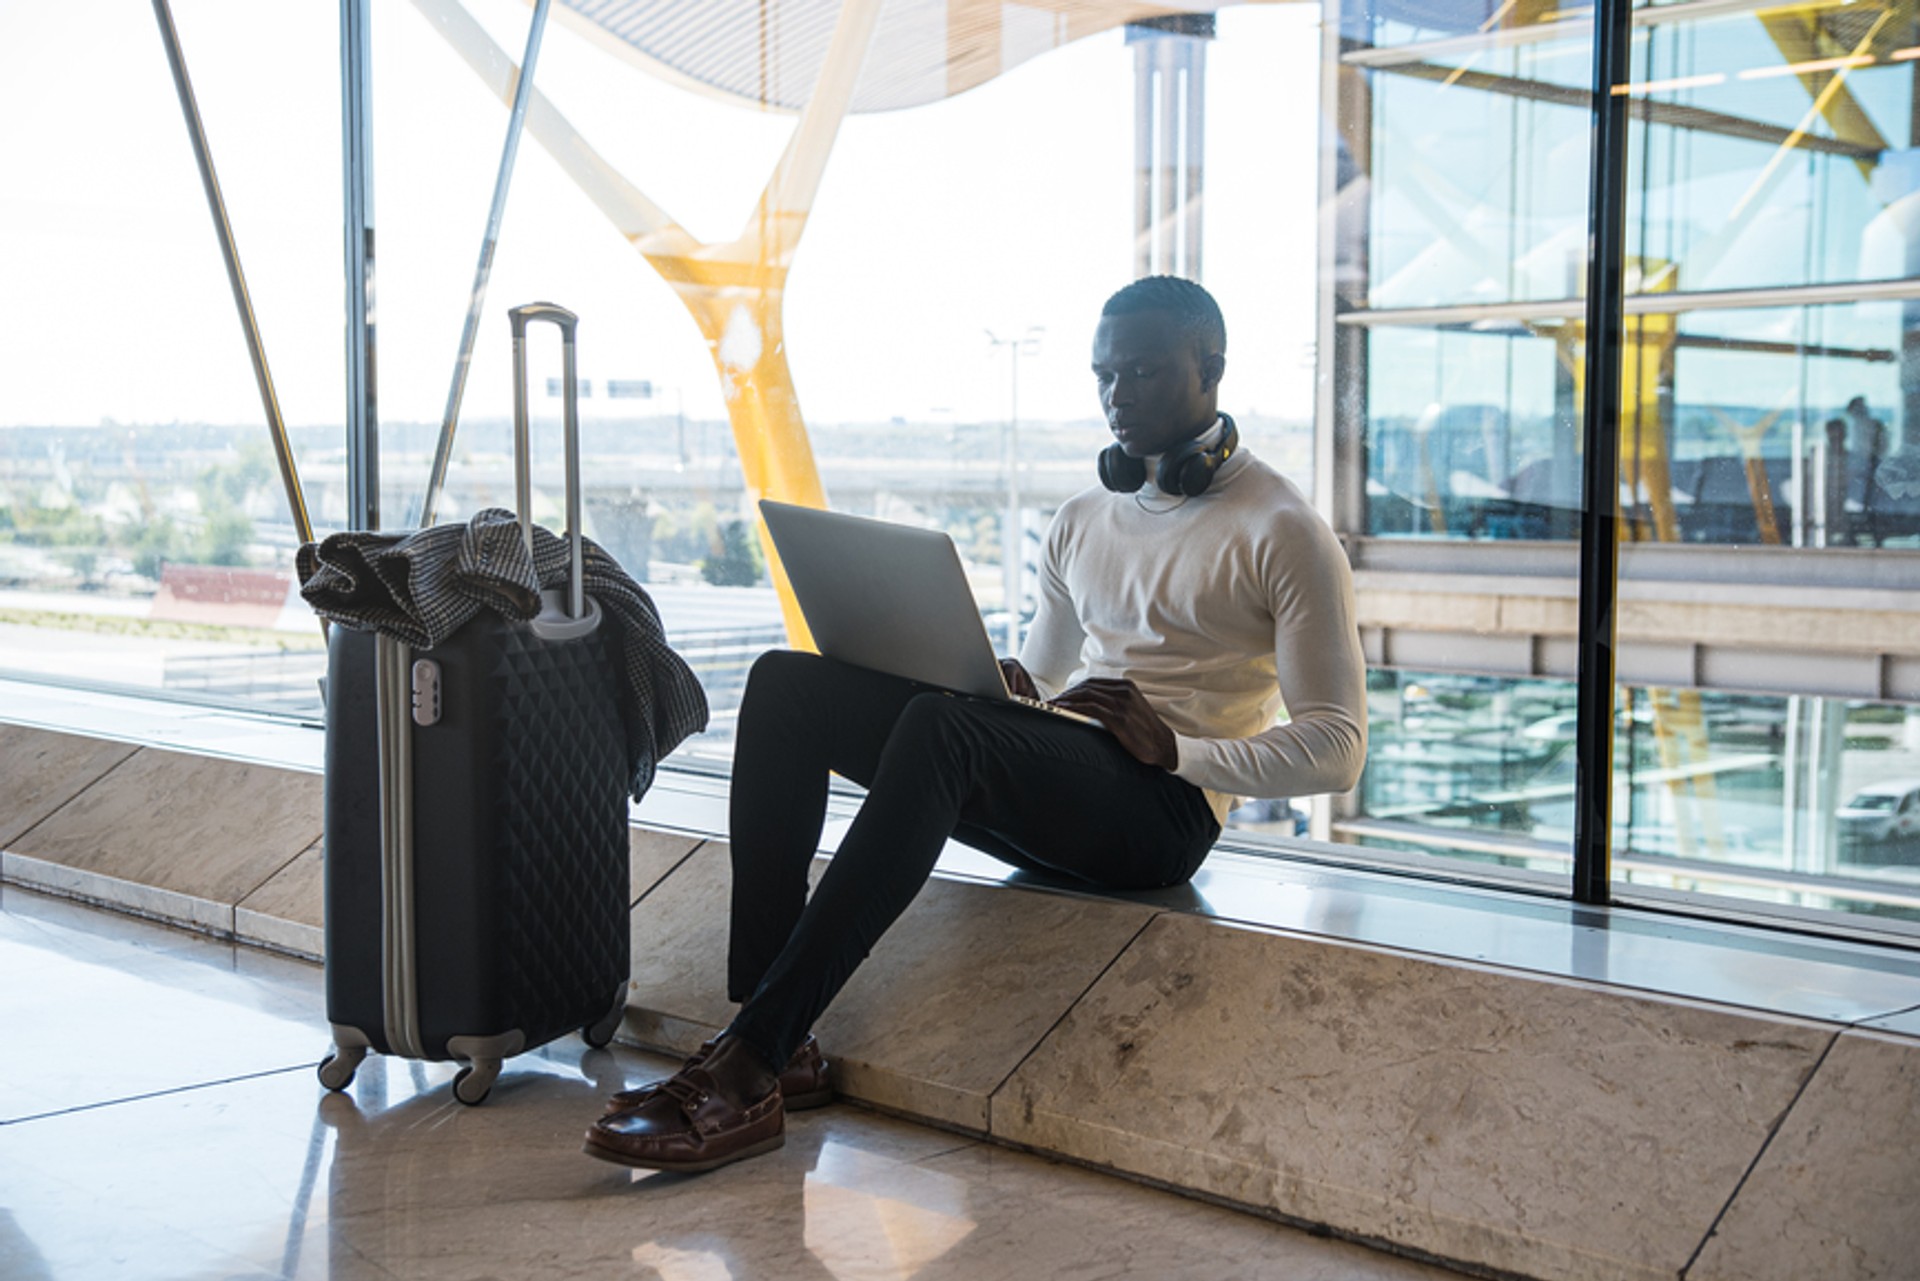 An employee generating his per diem business travel reports from the airport through Payhawk spend management solution